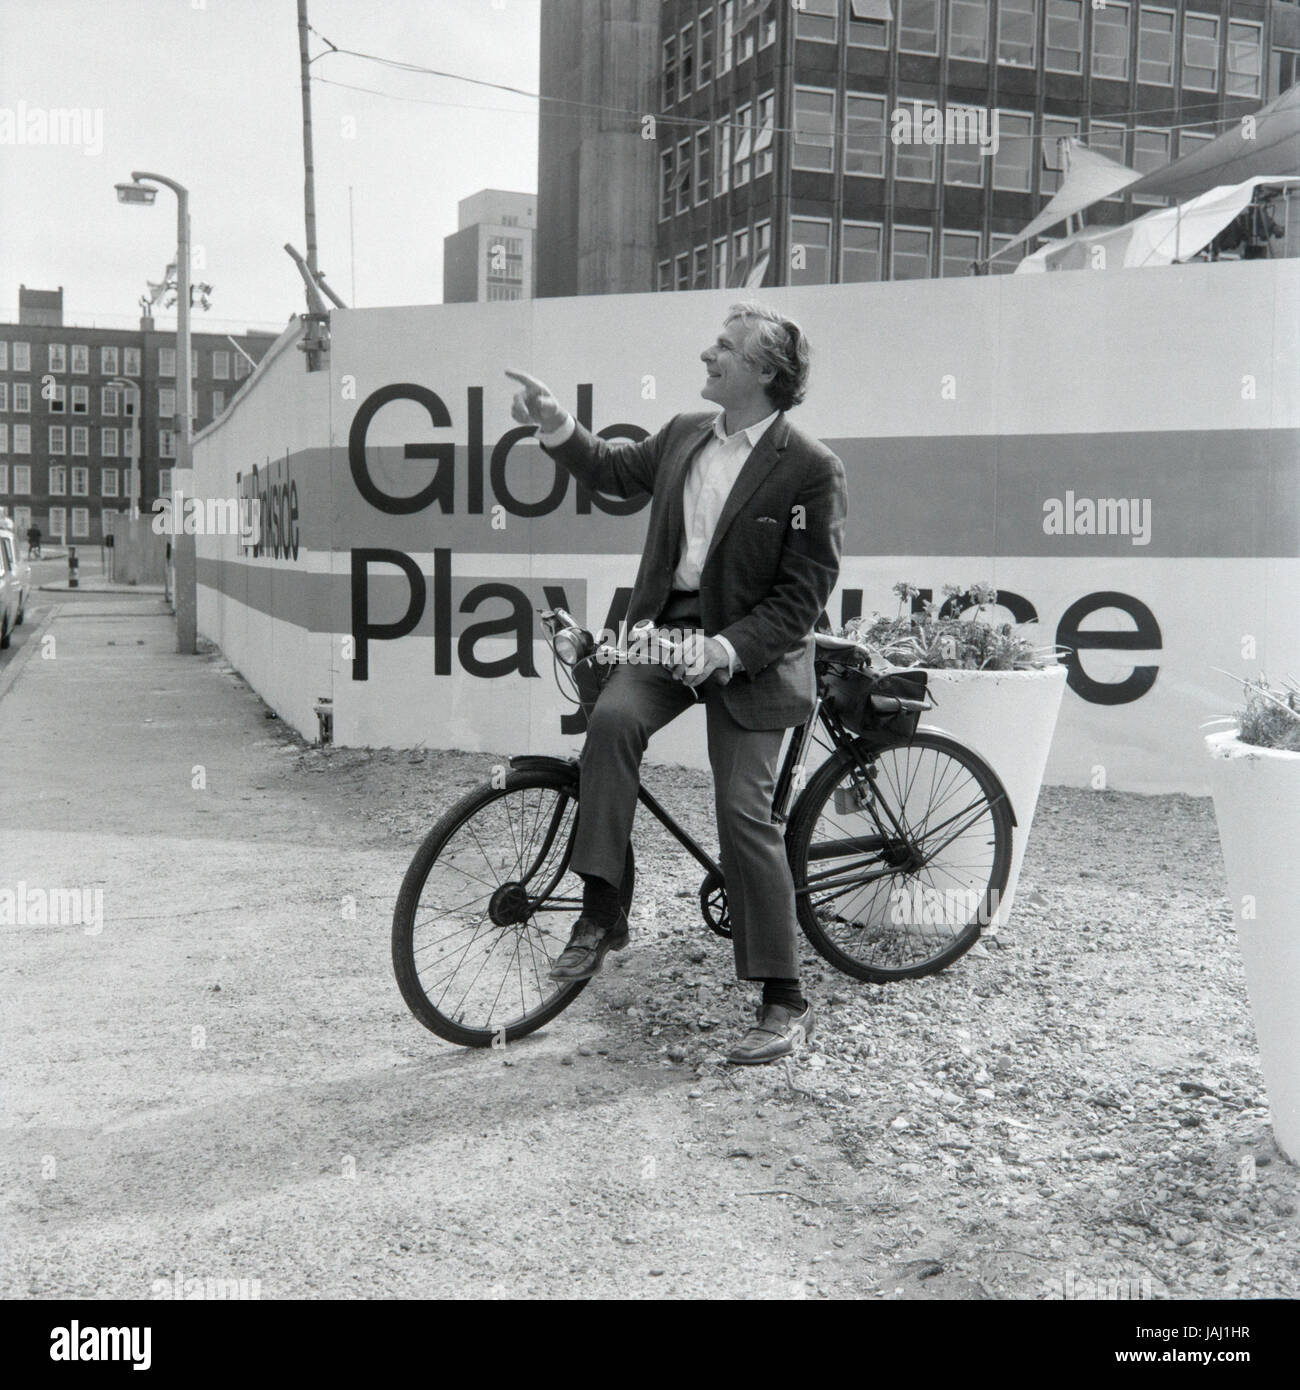 Actor and director Sam Wanamaker on his bicycle outside his proposed site for the Globe Playhouse theatre in London in 1972. The Sam Wanamaker Playhouse is an indoor theatre forming part of Shakespeare's Globe, along with the Globe Theatre on Bankside, London. Built making use of 17th-century plans for an indoor theatre, the playhouse recalls the layout and style of the Blackfriars Theatre, although it is not an exact reconstruction. Its shell was built during the construction of the Shakespeare's Globe complex, notable for the reconstruction of the open-air Globe Theatre of the same period. Stock Photo